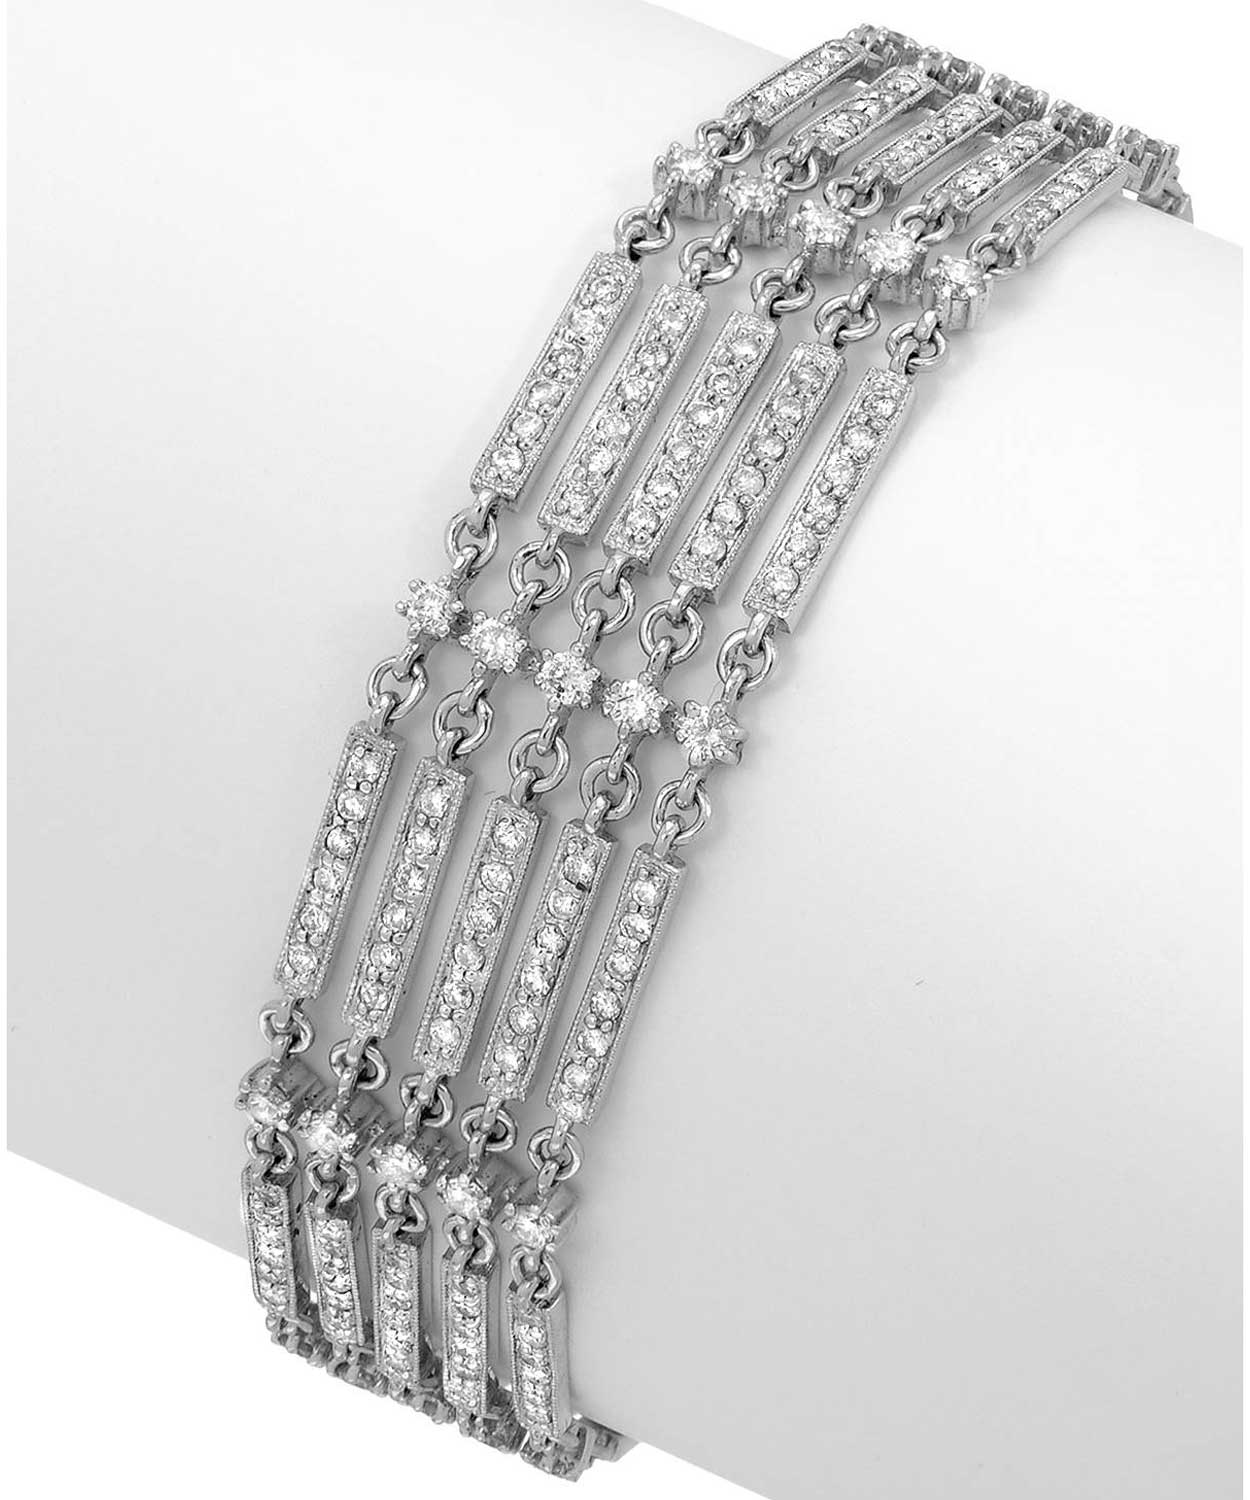 Glamour Collection 3.77 ctw Diamond 18k White Gold Statement Link Bracelet View 1